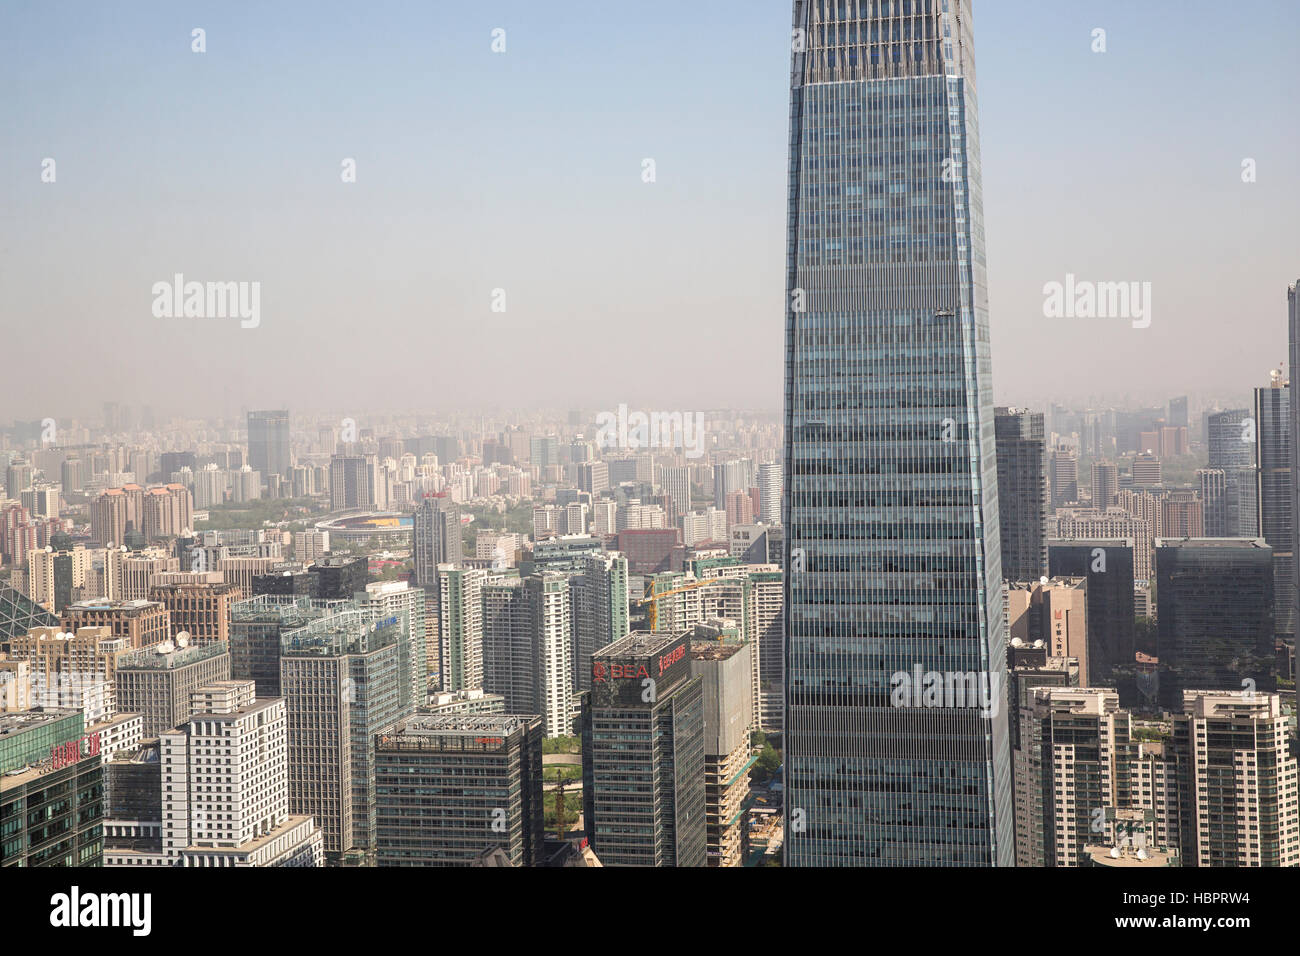 Beijing, China skyline featuring the China World Trade Center tower ...